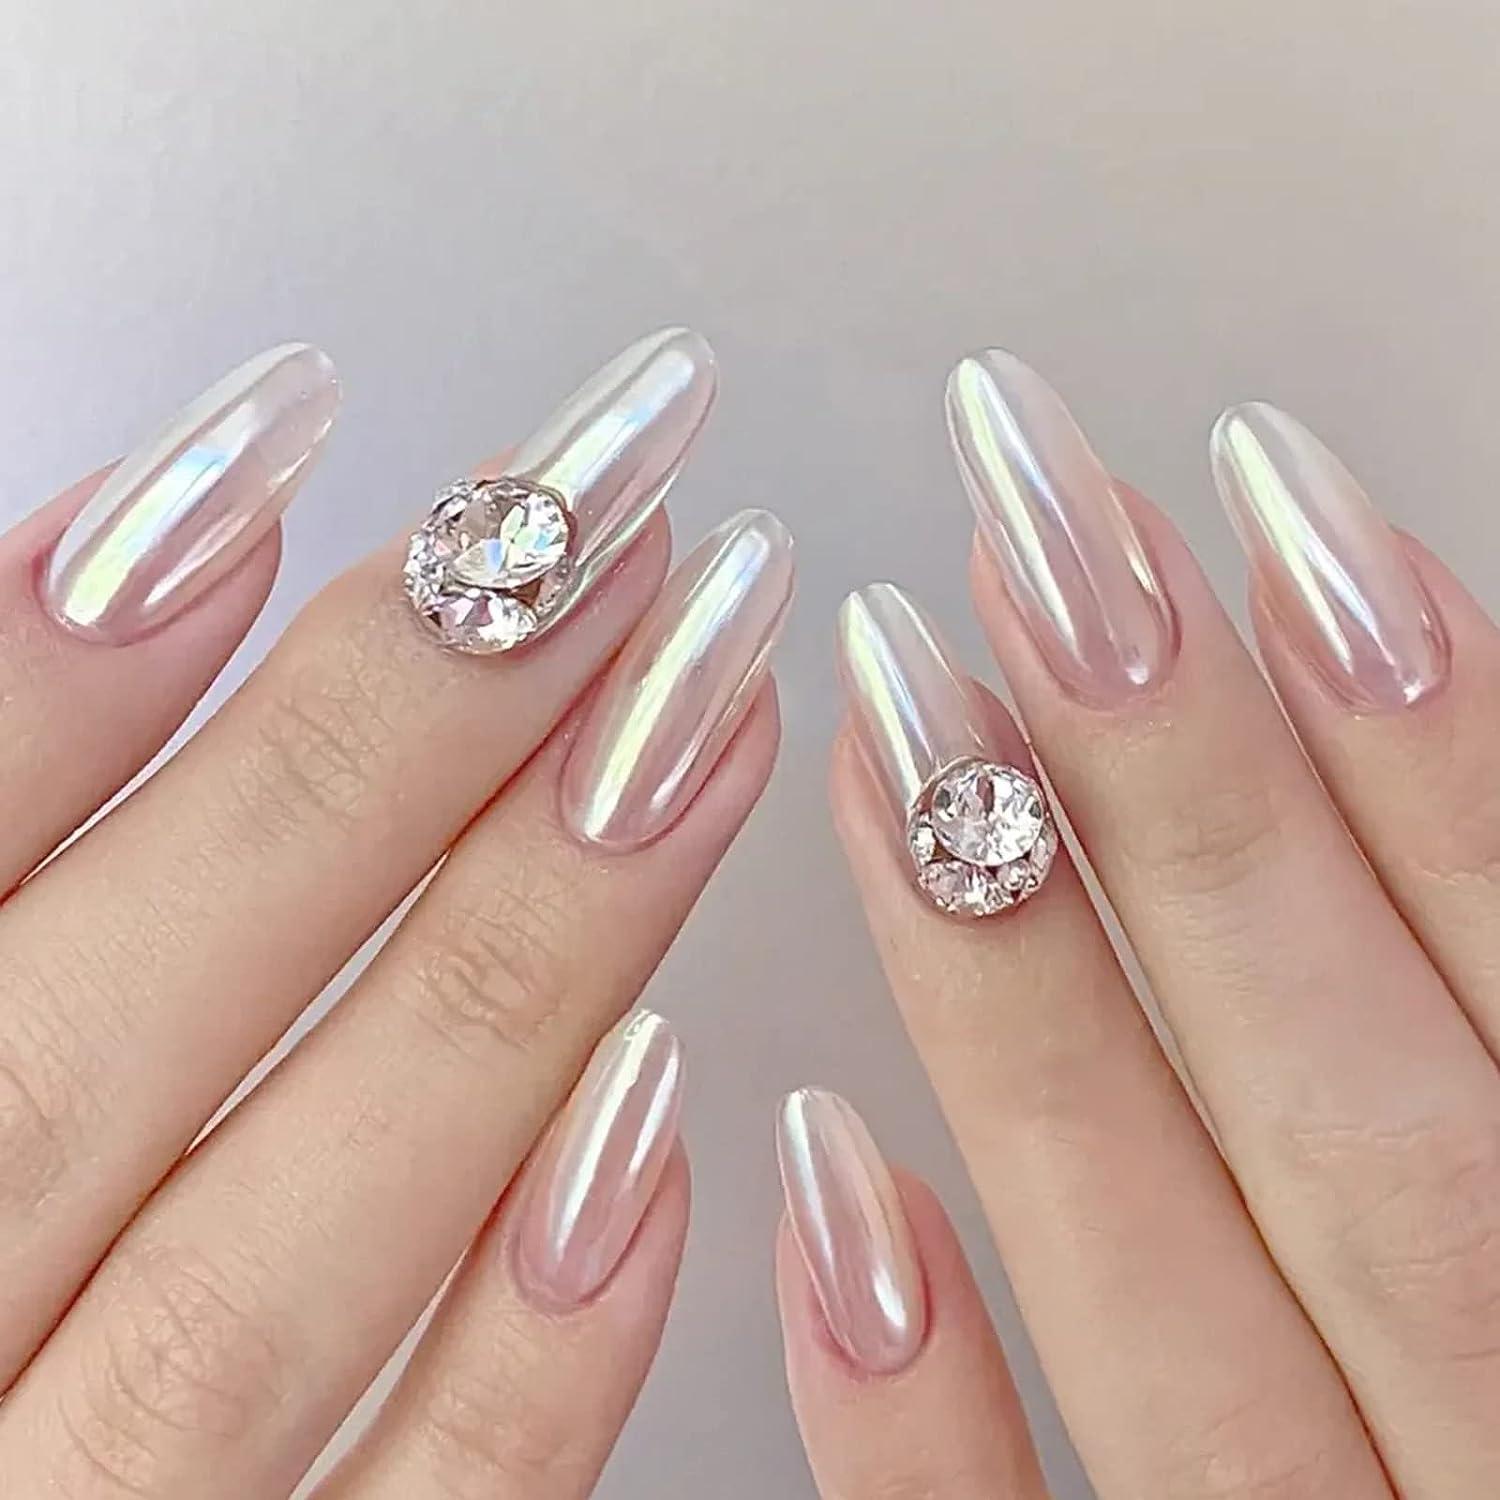 White pearl nails with a rhinestone accent | White nails, Acrylic nails, Pearl  nails